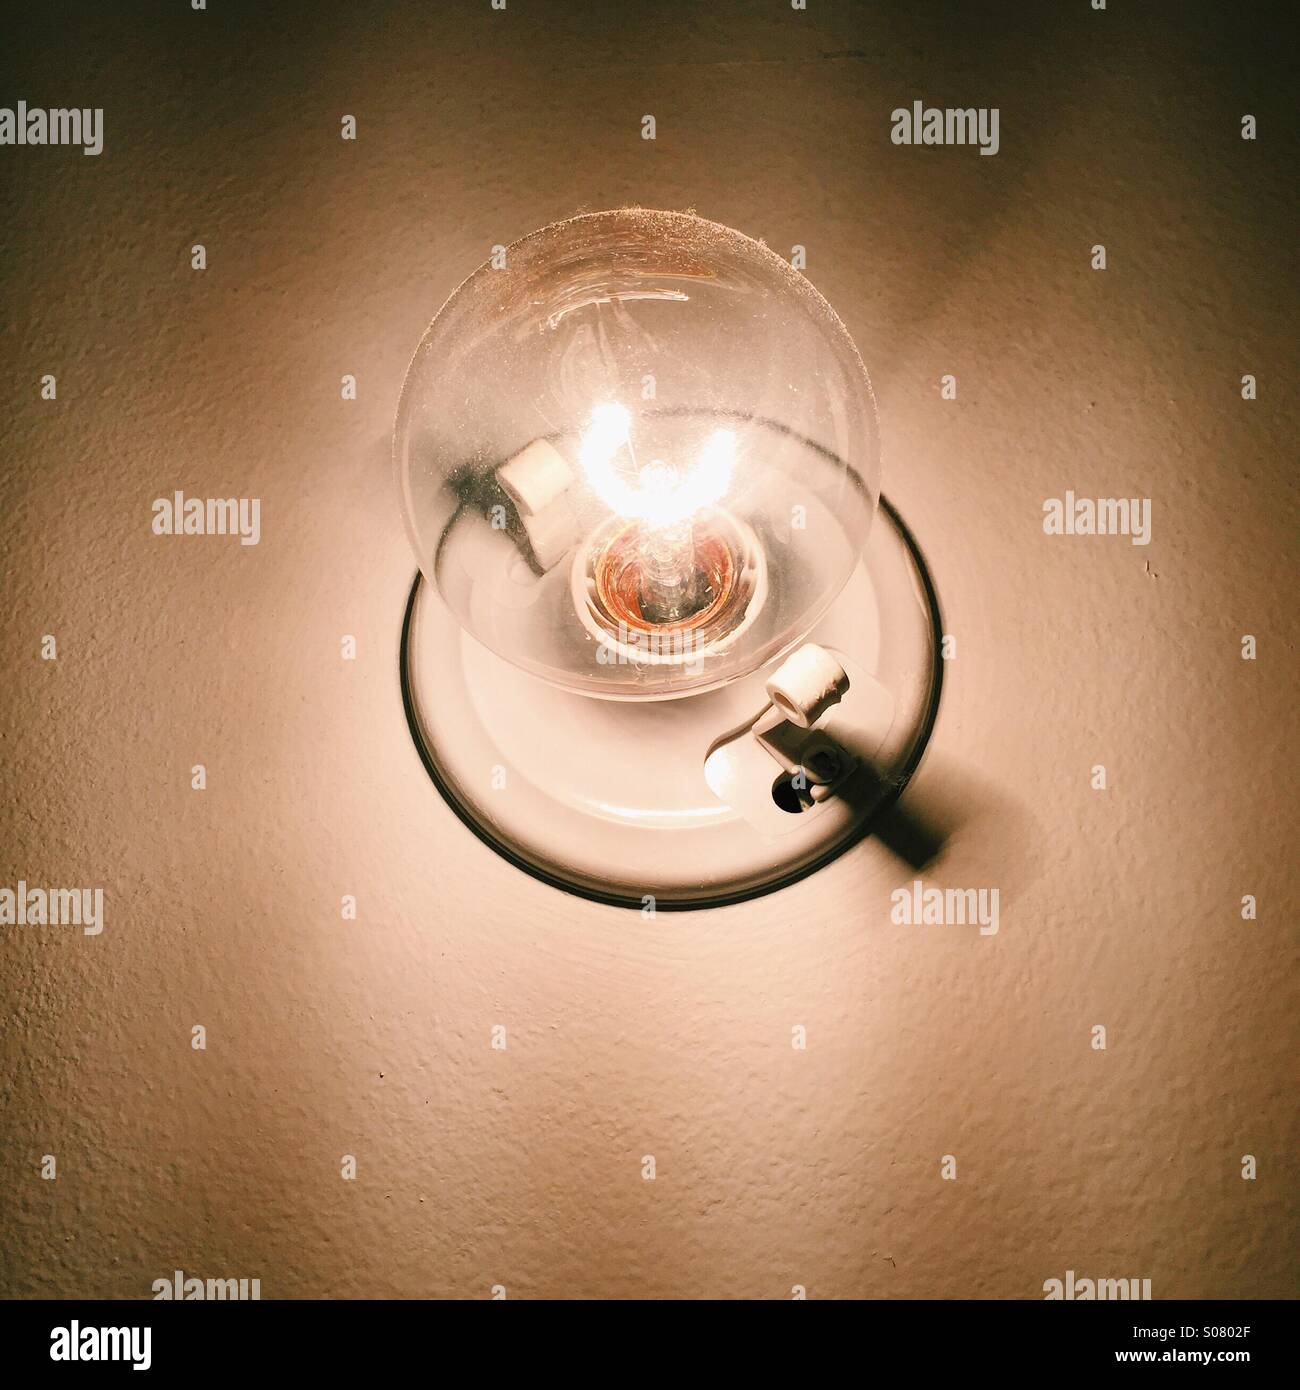 A single, large, clear, illuminated tungsten lightbulb mounted on a wall. Stock Photo